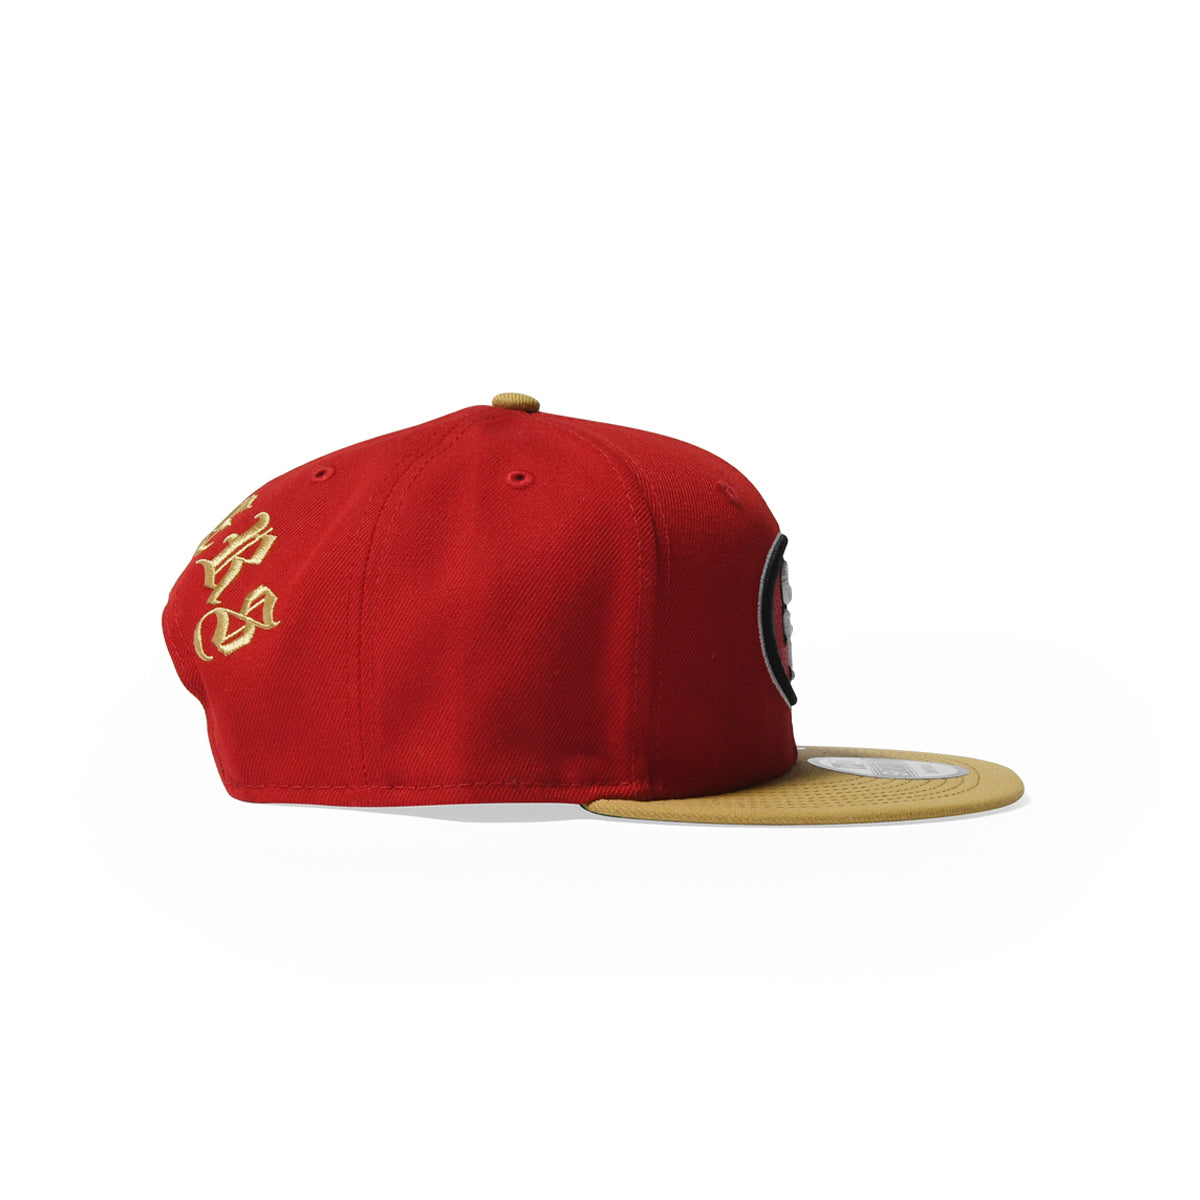 NEW ERA BlackLETTER ARCH SF 49ERS 9FIFTY